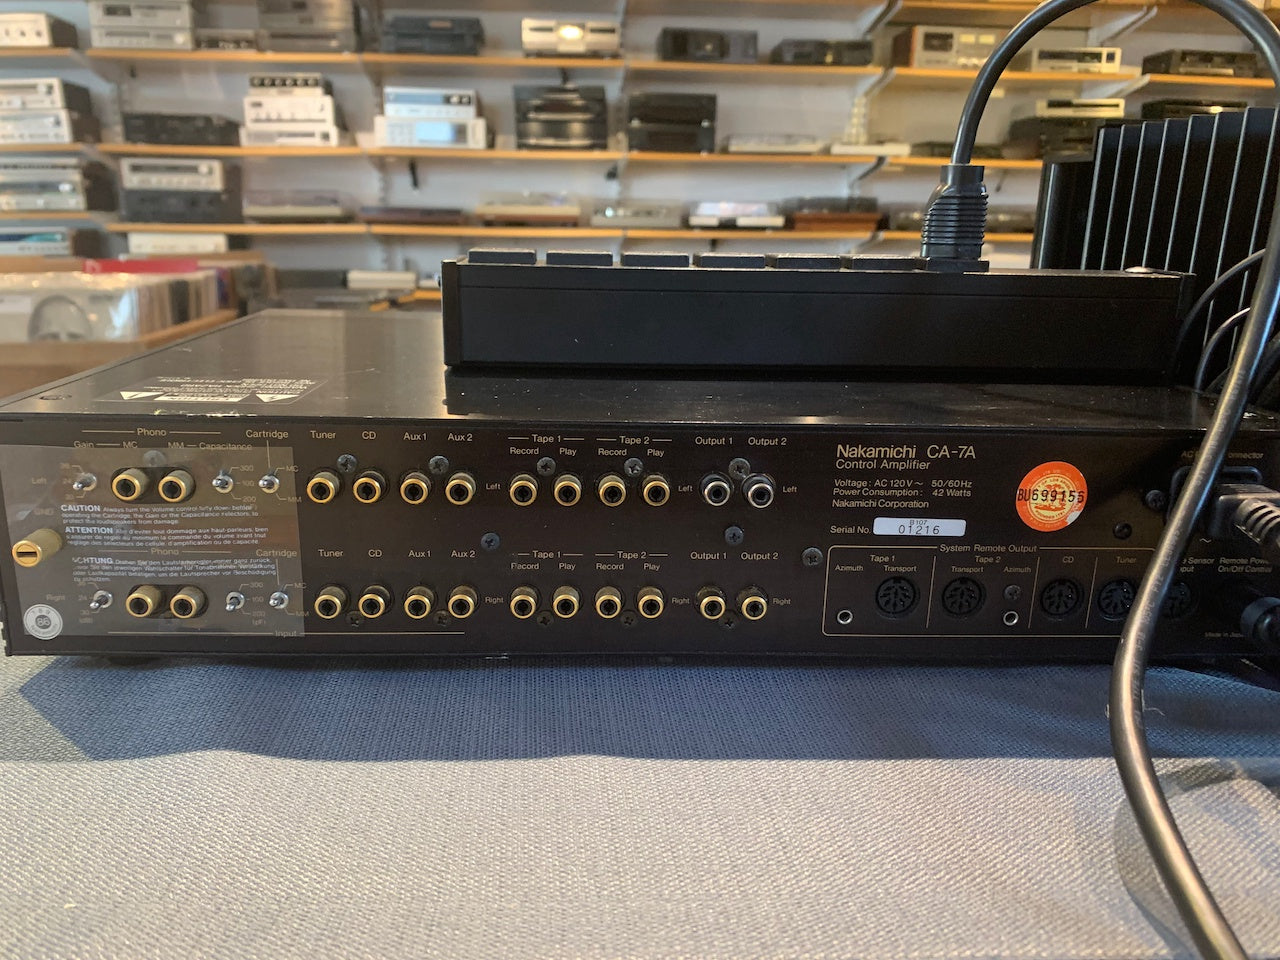 1987 Nakamichi PA7 Power Amplifier * 200W RMS * & CA-7A Preamplifier with SPC1 Power Controller